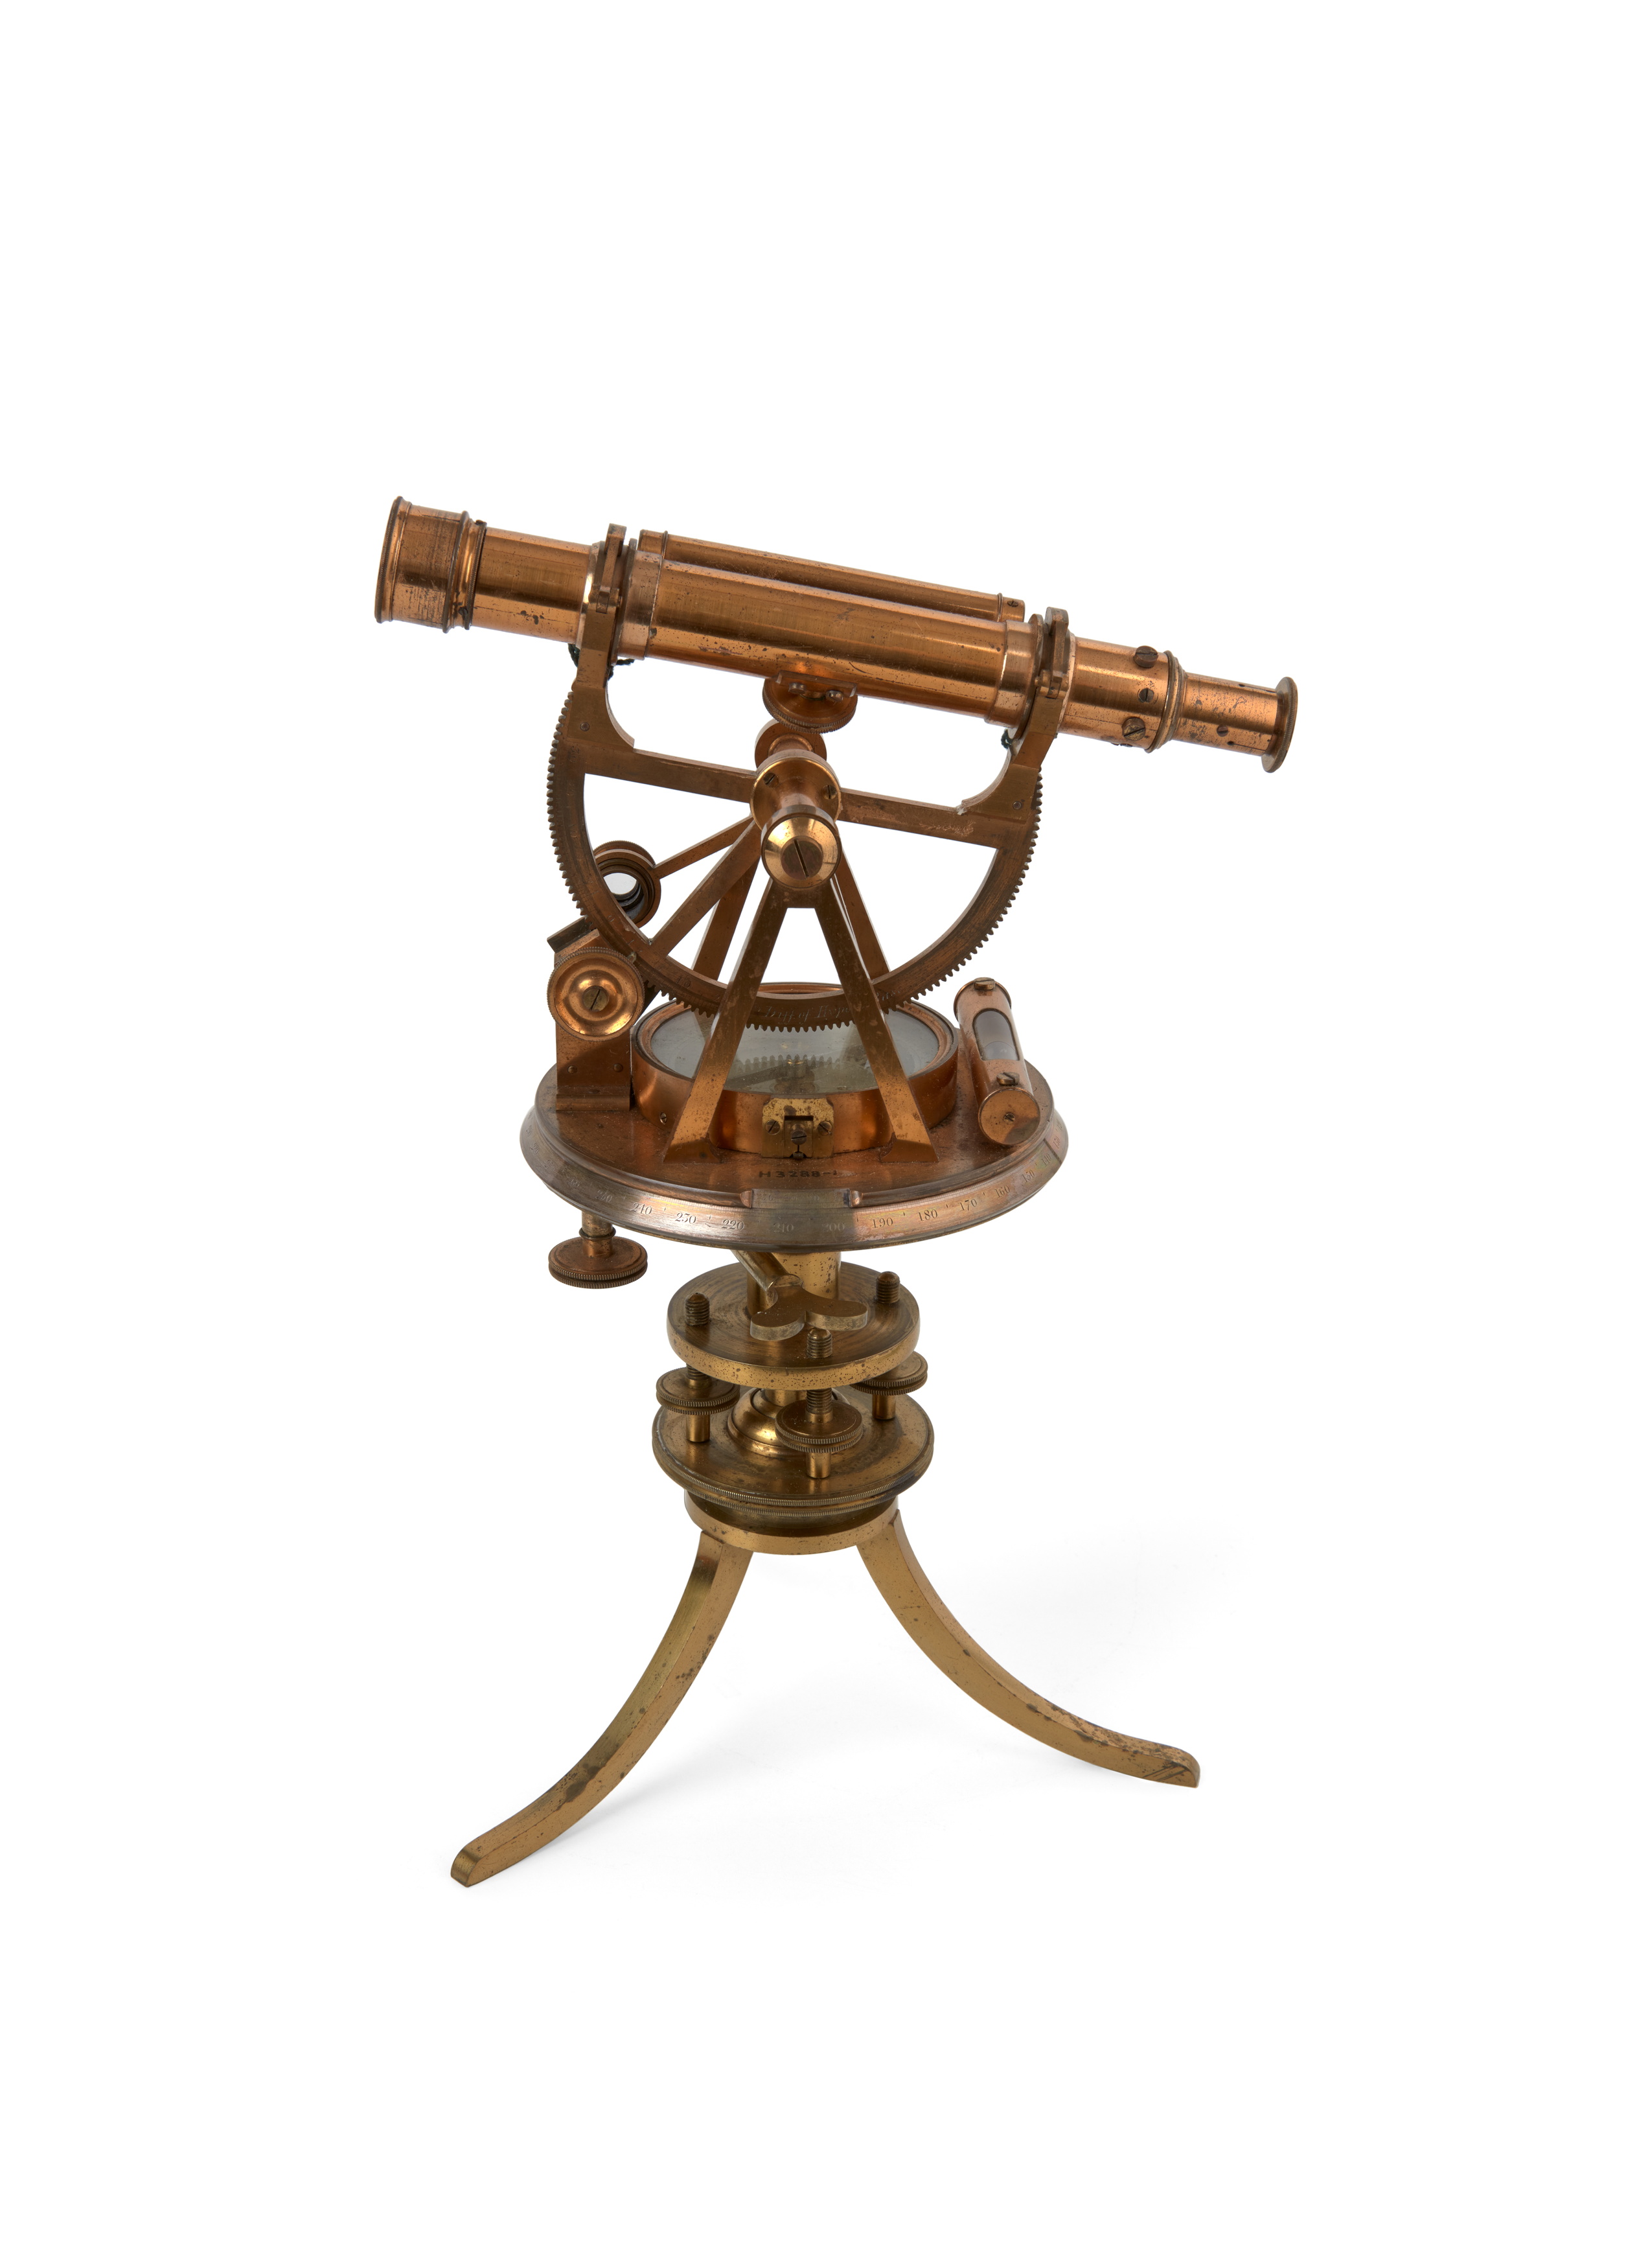 Theodolite made by William Cary, London, England